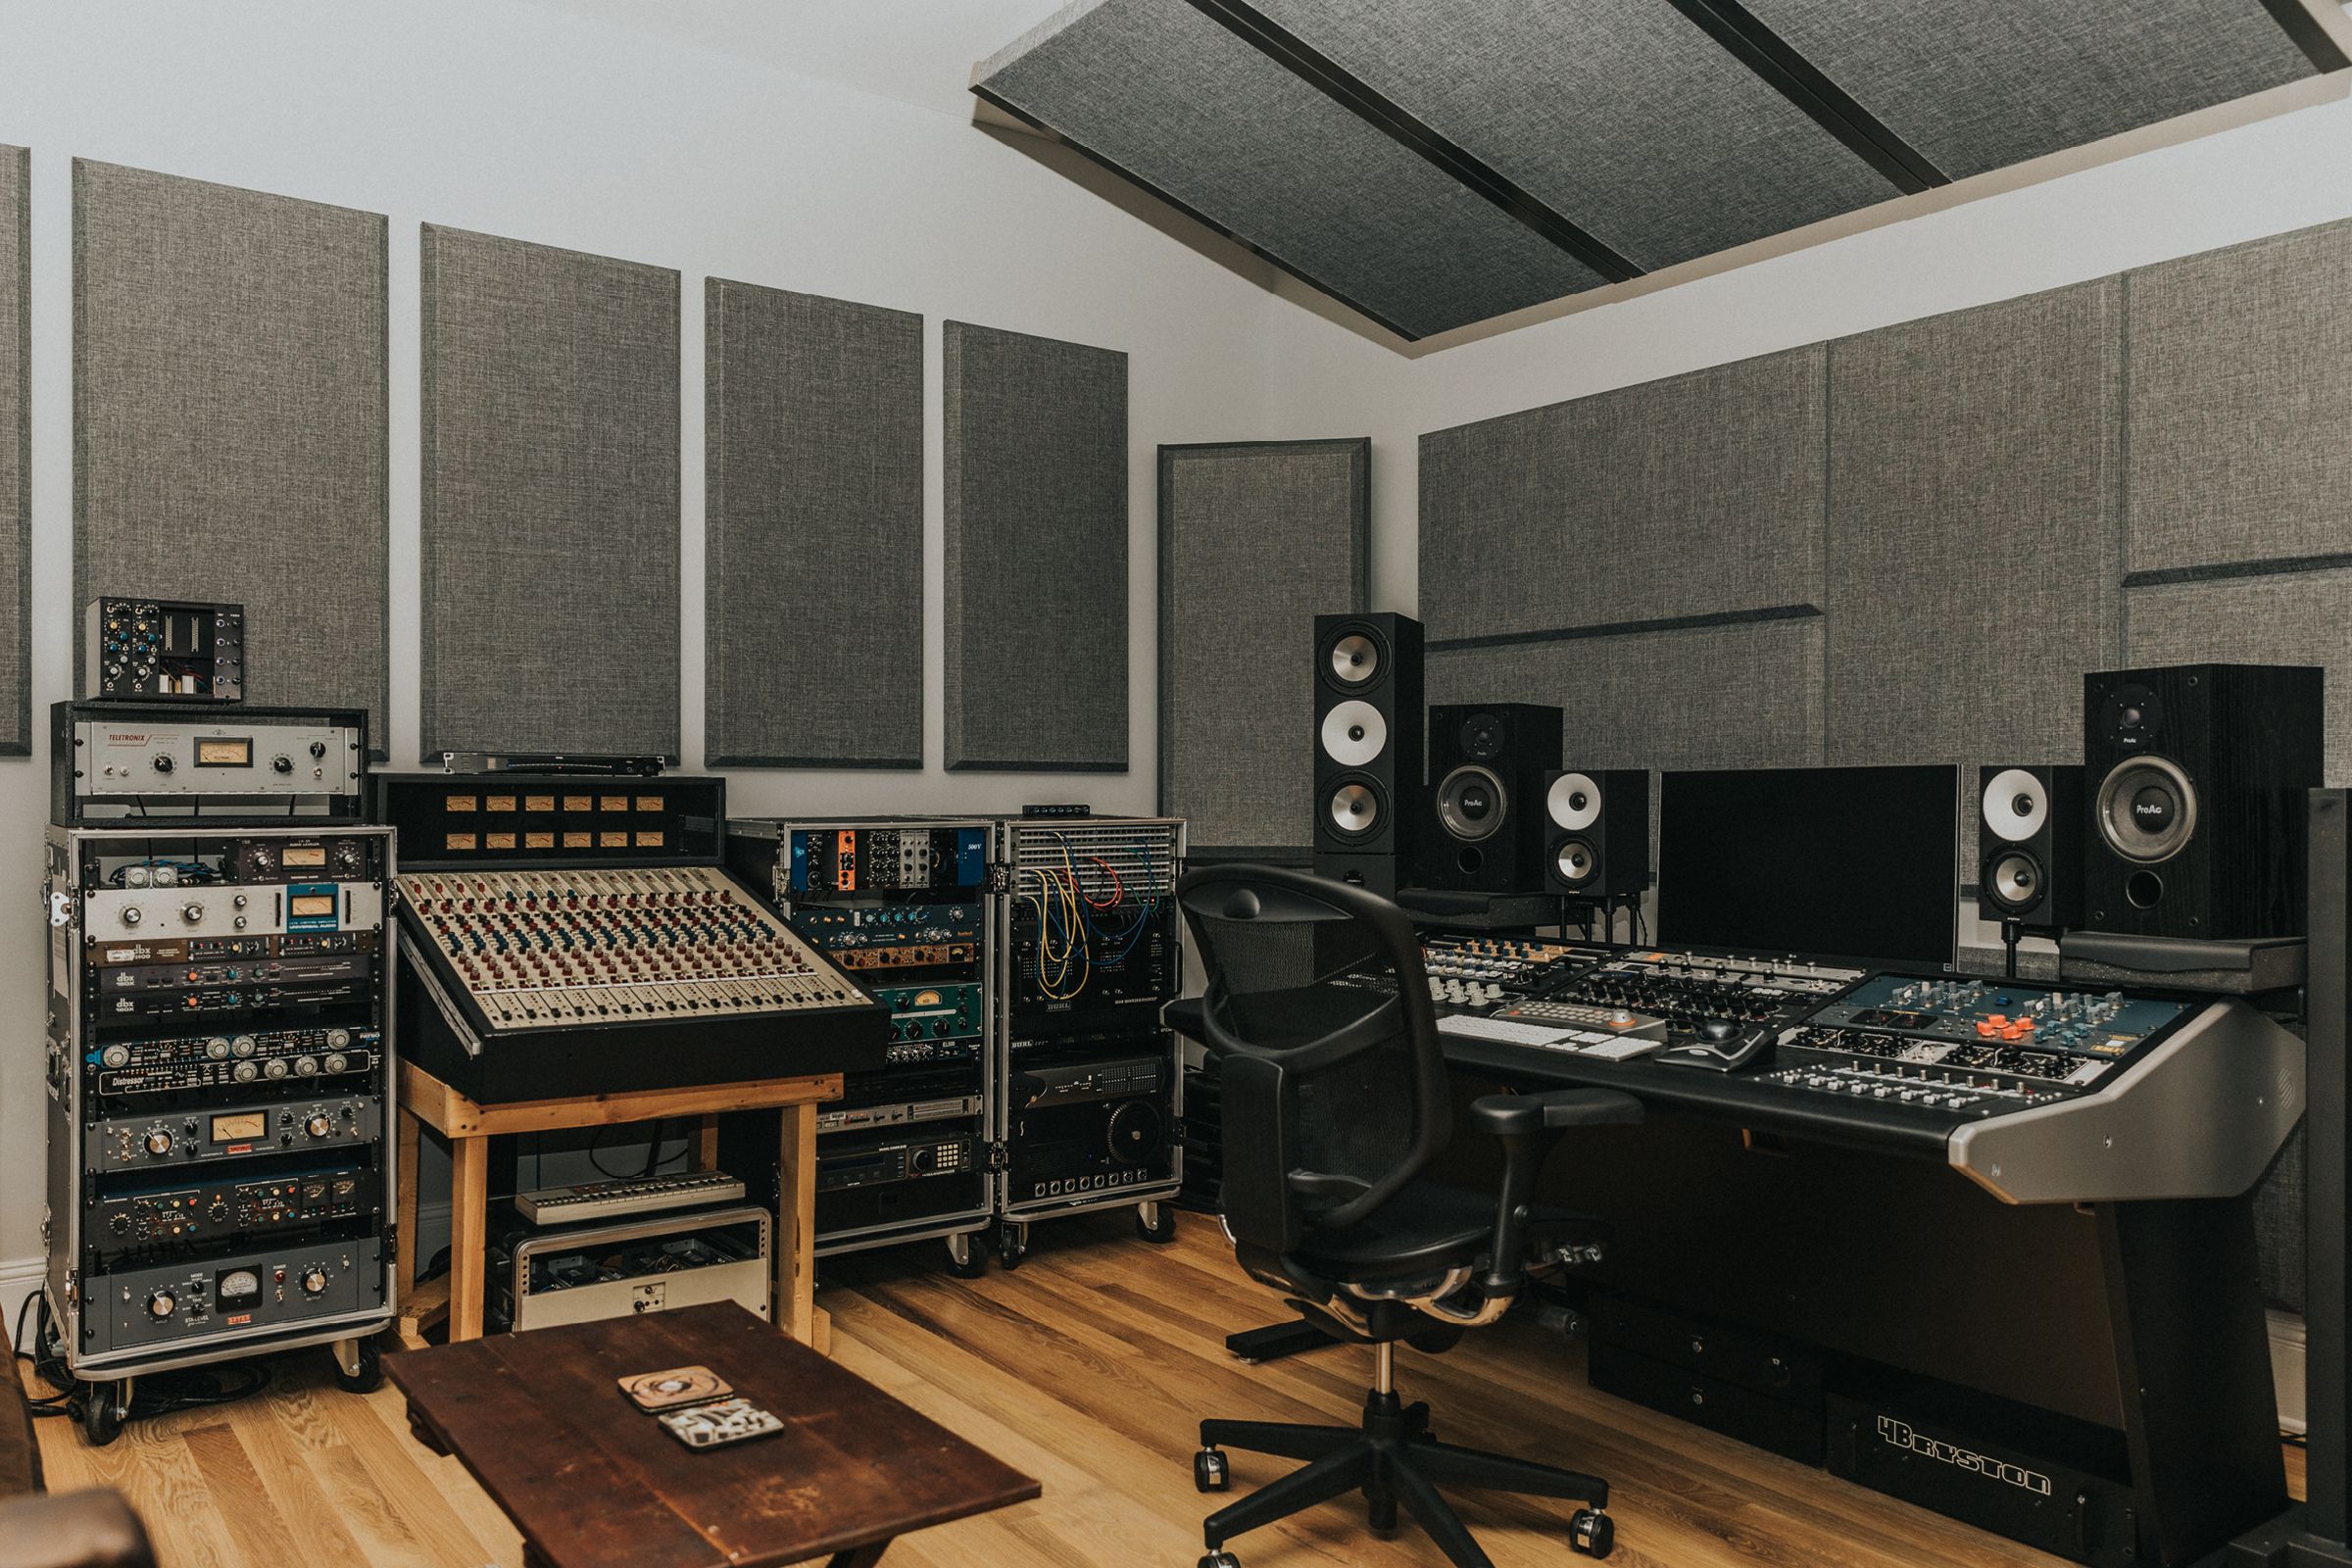 Recording studio mixing room with grey acoustic panels installed on white walls and on ceiling